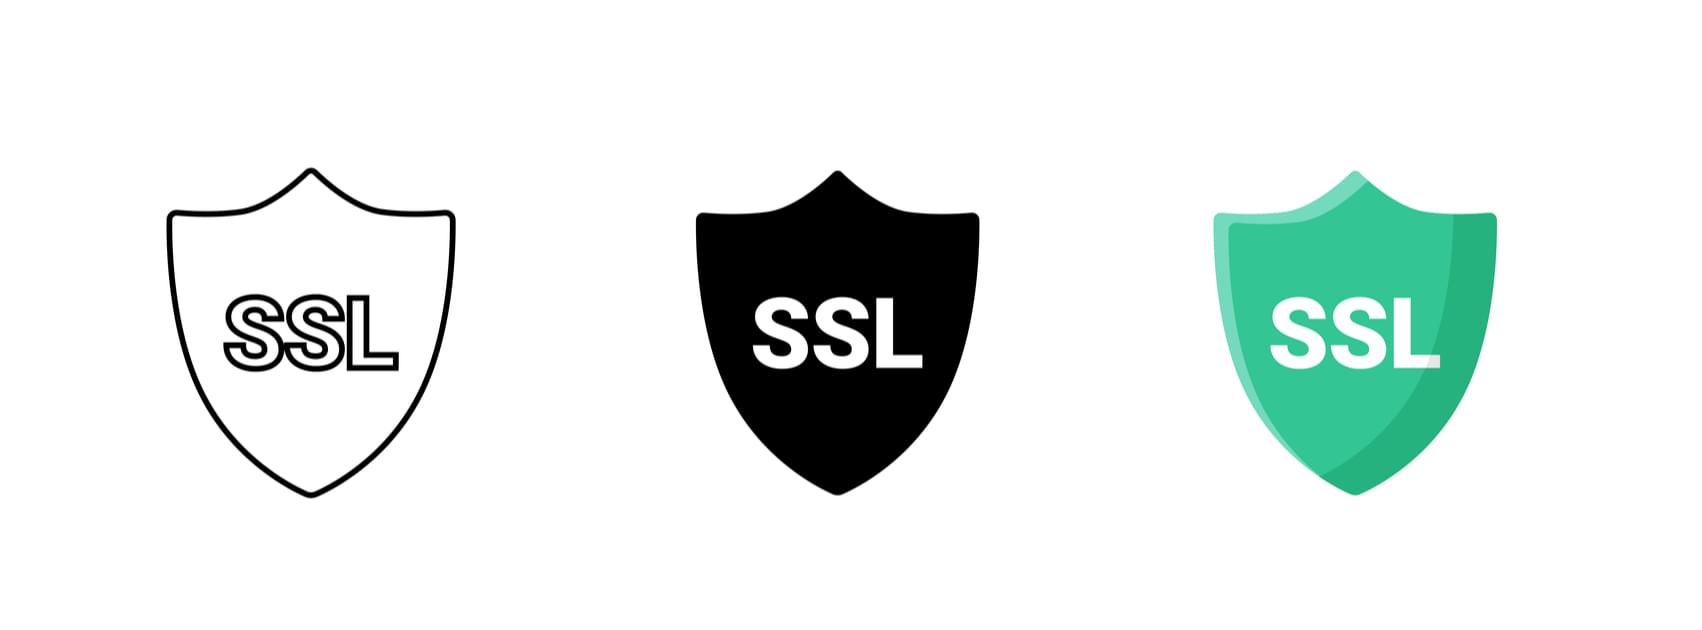 DV, OV and EV SSL certificates - What is the difference?